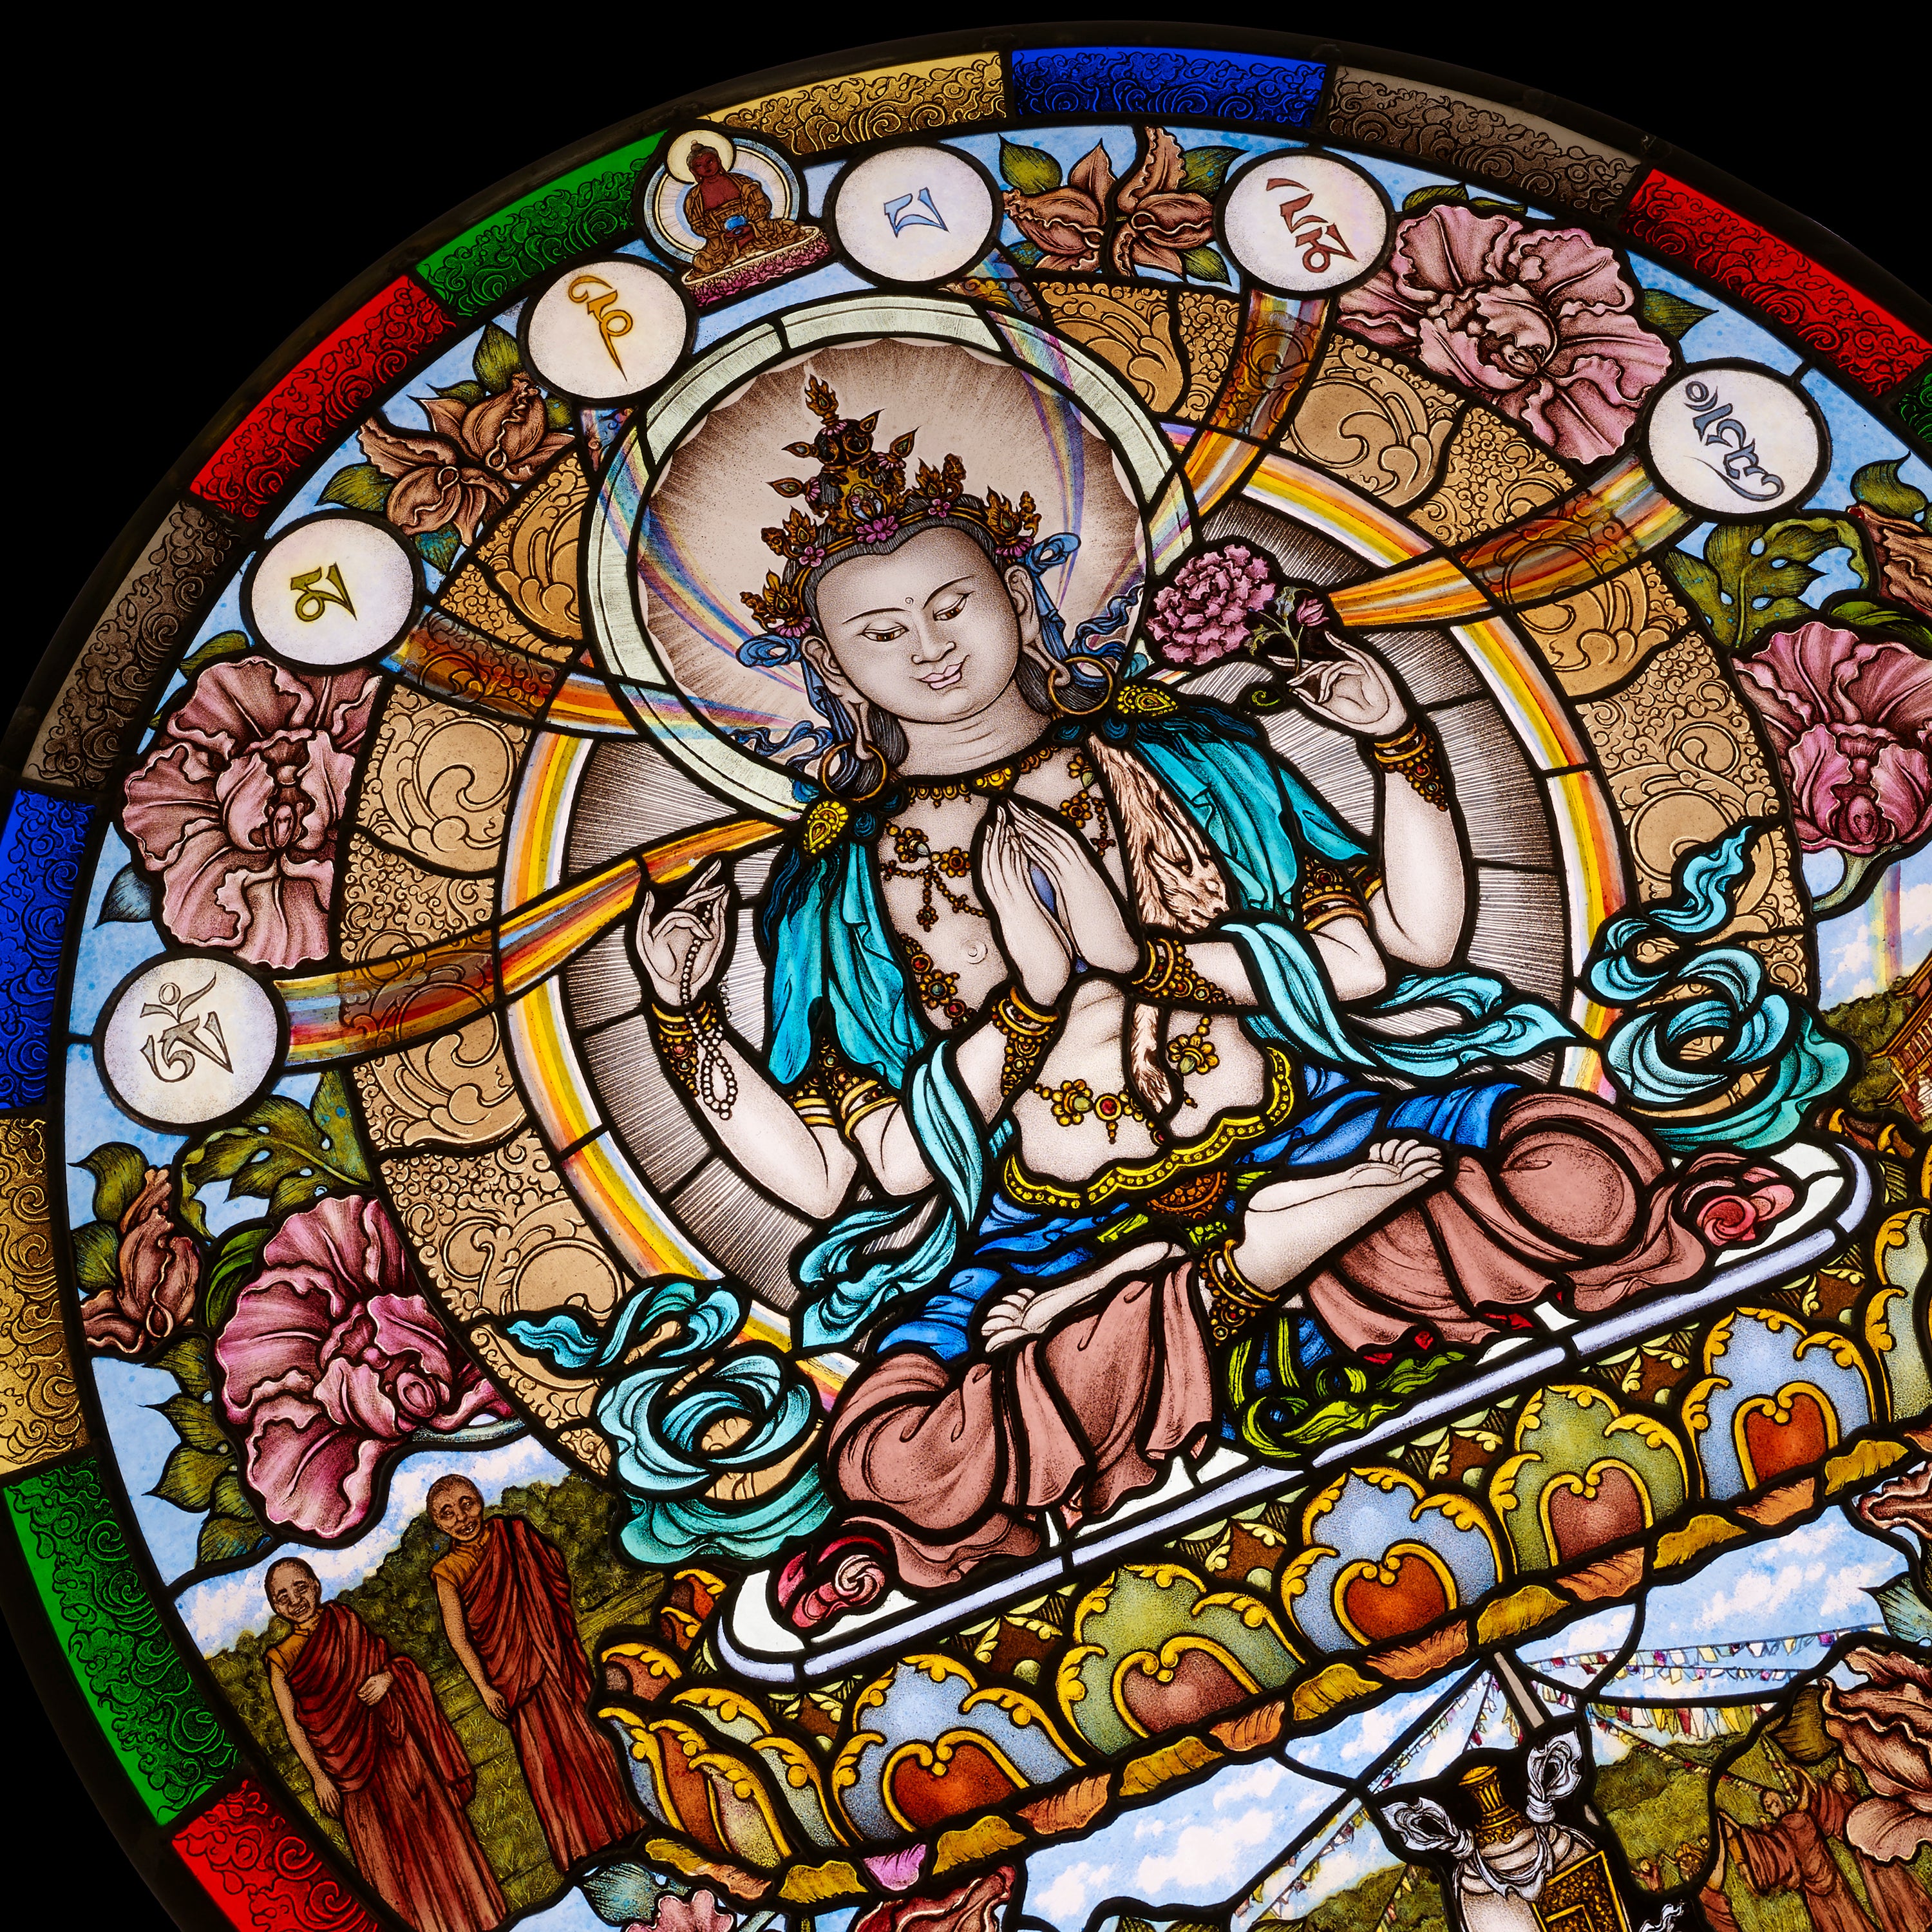 Custom Stained Glass Thangka: Himalayan Art: Peaceful Single Diety 32" Diameter Circle/Square$3,200 USD